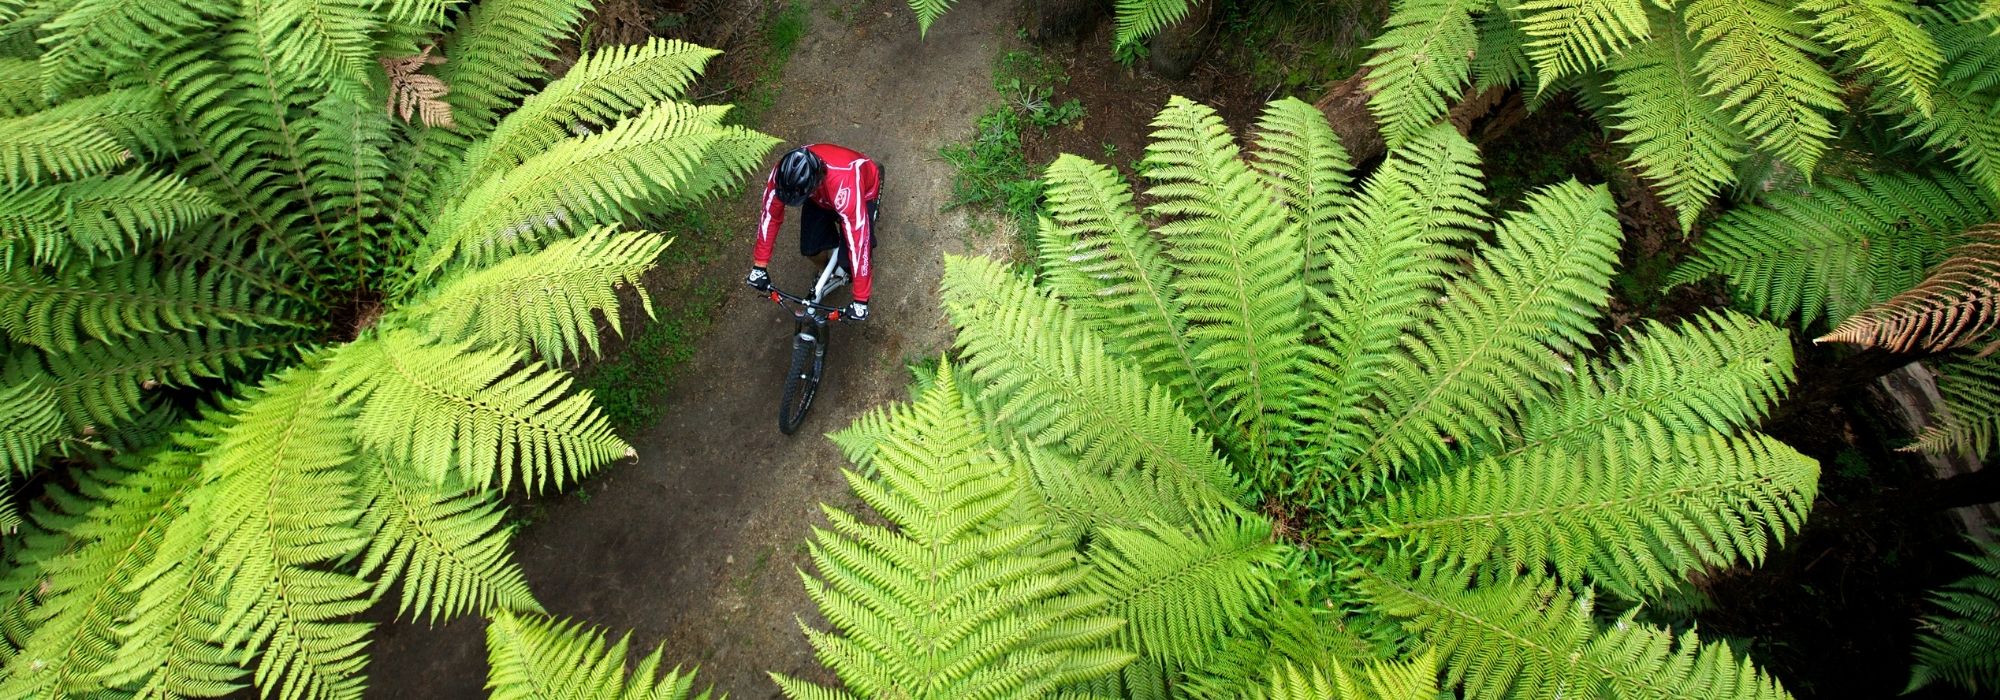 Crankworx Rotorua: There really is a cycle trail for everyone